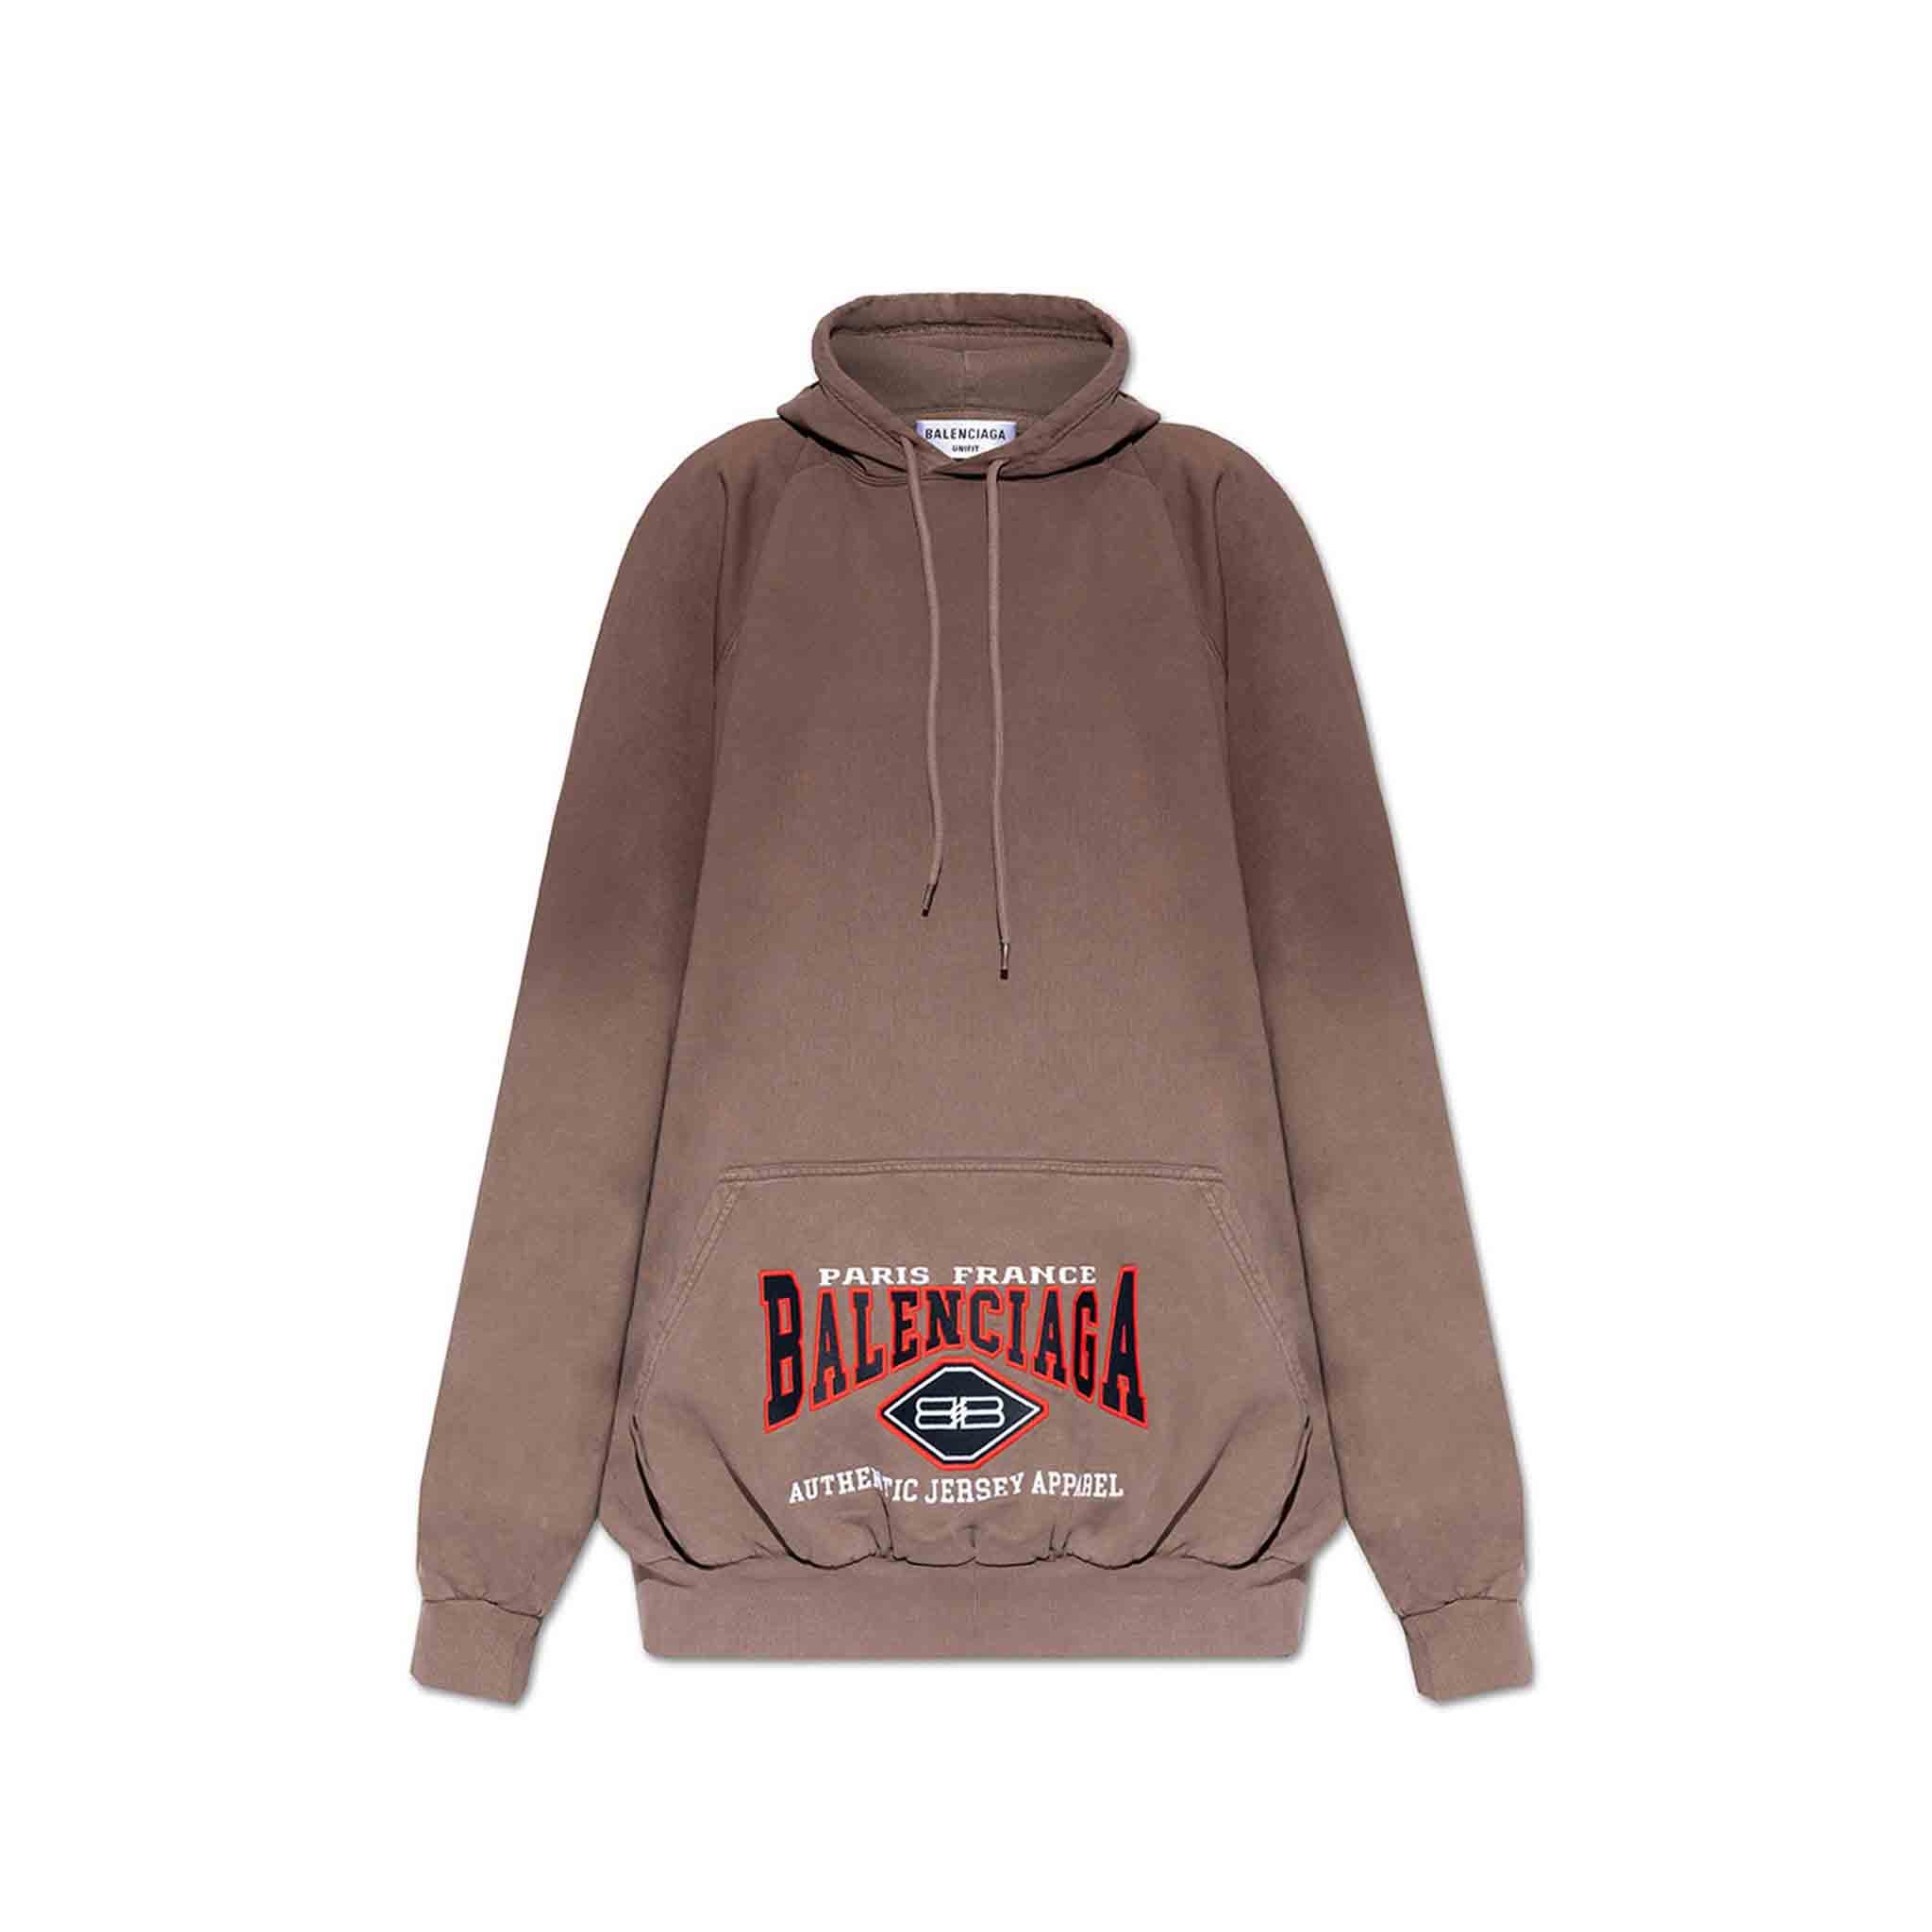 Stay comfortable and stylish in this oversized hooded sweatshirt from Balenciaga. The medium fleece material is both warm and comfortable, and the oversized fit gives it a relaxed vibe. The logo embroidered on the kangaroo pocket adds a touch of brand recognition, and the unifit style ensures a comfortable fit. Whether you're running errands or lounging at home, this sweatshirt is sure to become a go-to in your wardrobe. 